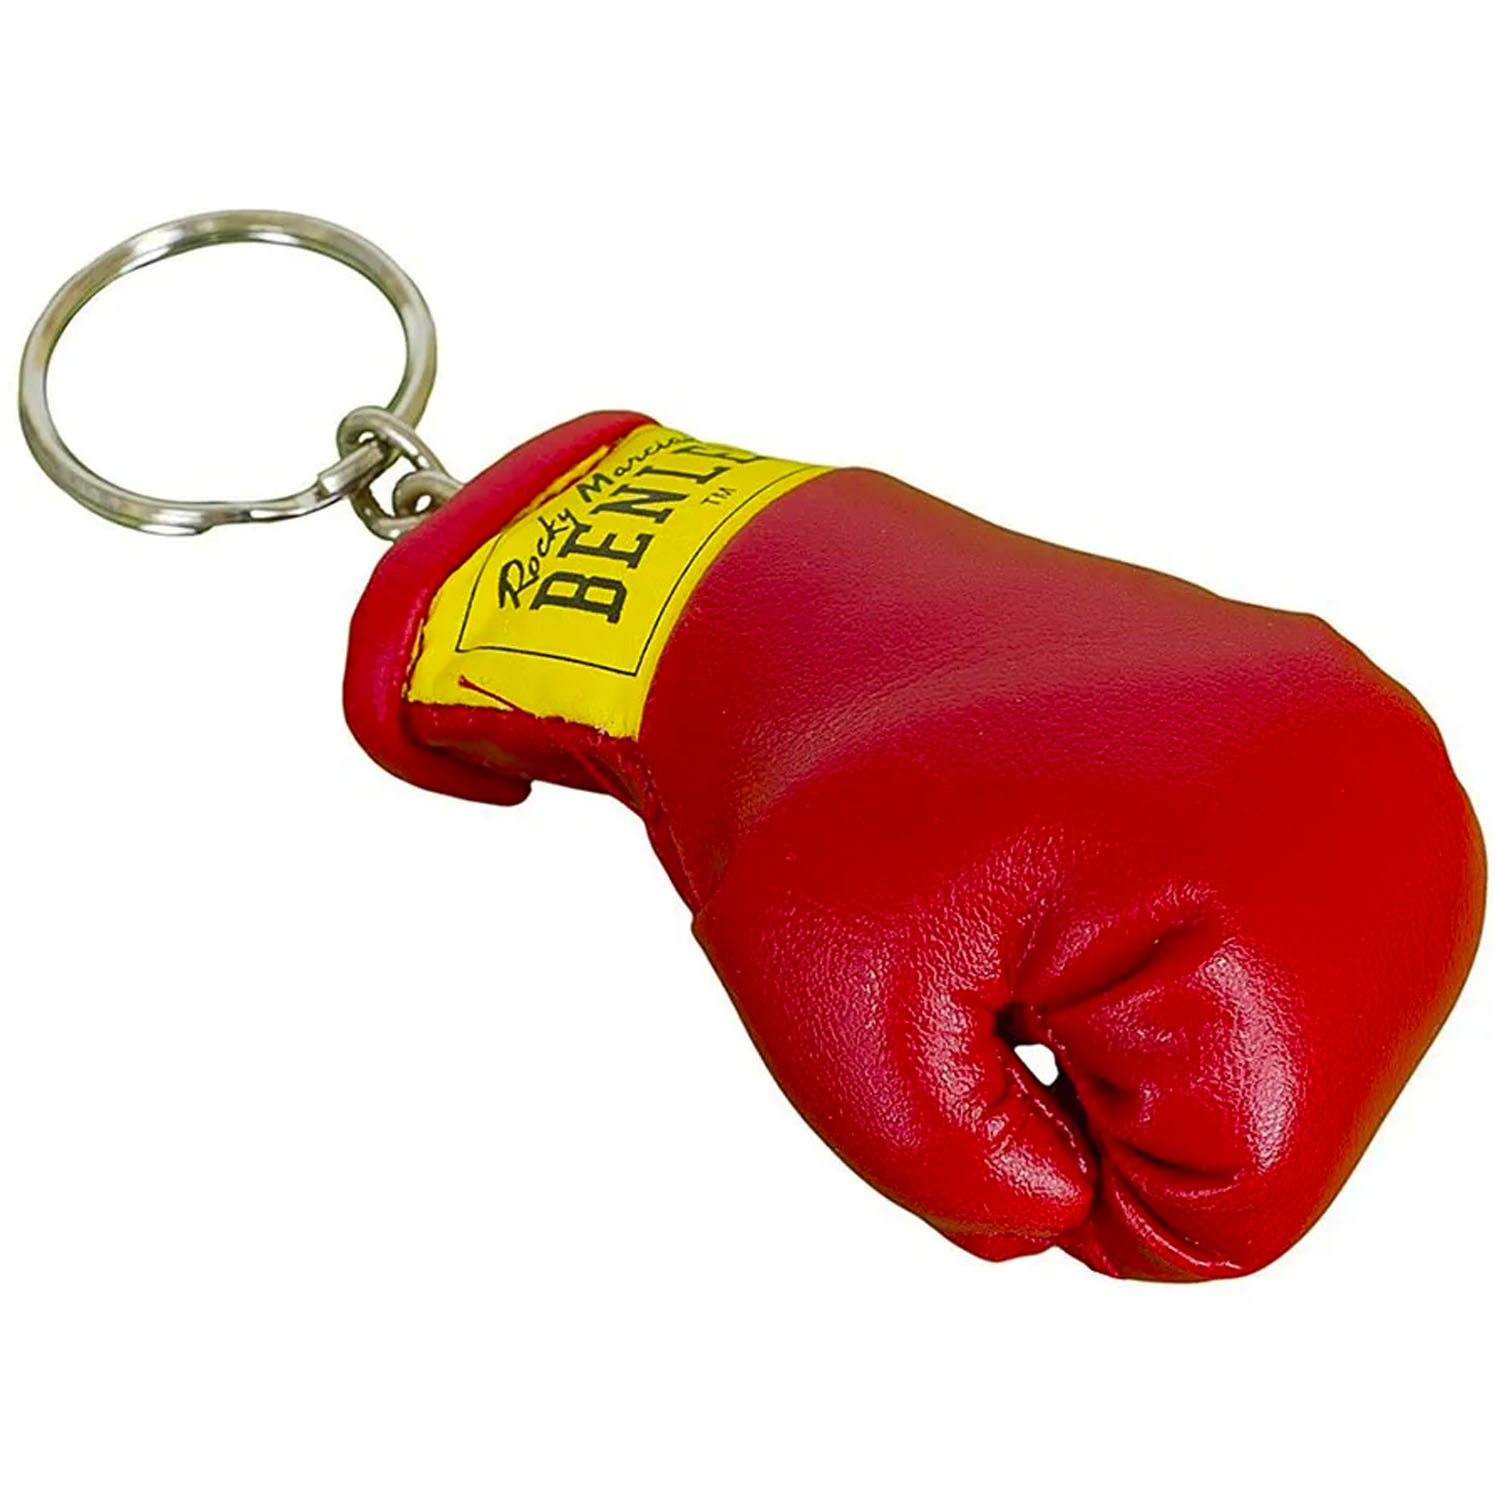 BENLEE Key Chain, Boxing Glove, red